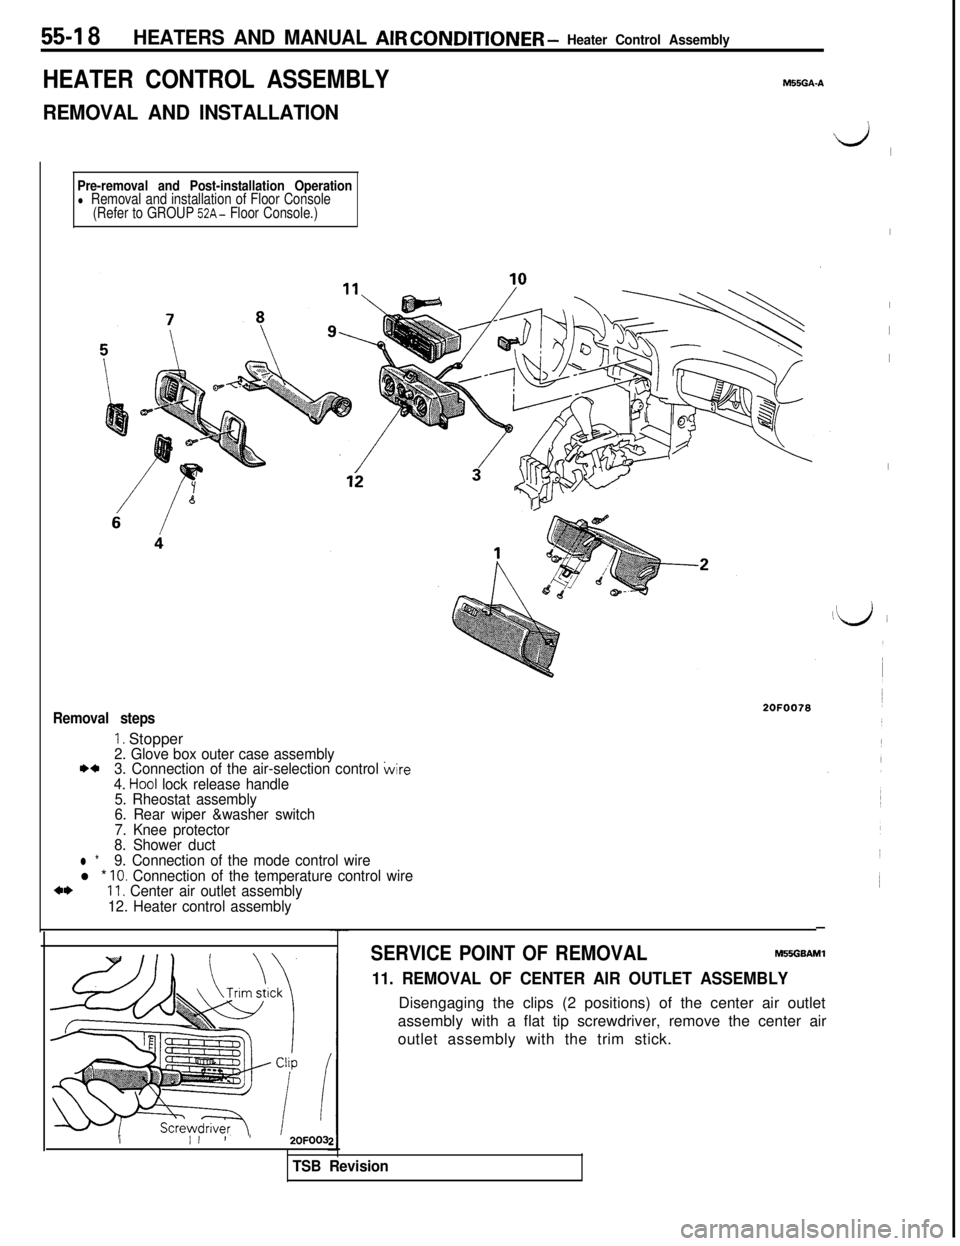 MITSUBISHI 3000GT 1991  Service Manual 55-I 8HEATERS AND MANUAL AIR CONDlTlONER - Heater Control Assembly
HEATER CONTROL ASSEMBLY
REMOVAL AND INSTALLATIONM55GA-A
Pre-removal and Post-installation Operationl Removal and installation of Floo